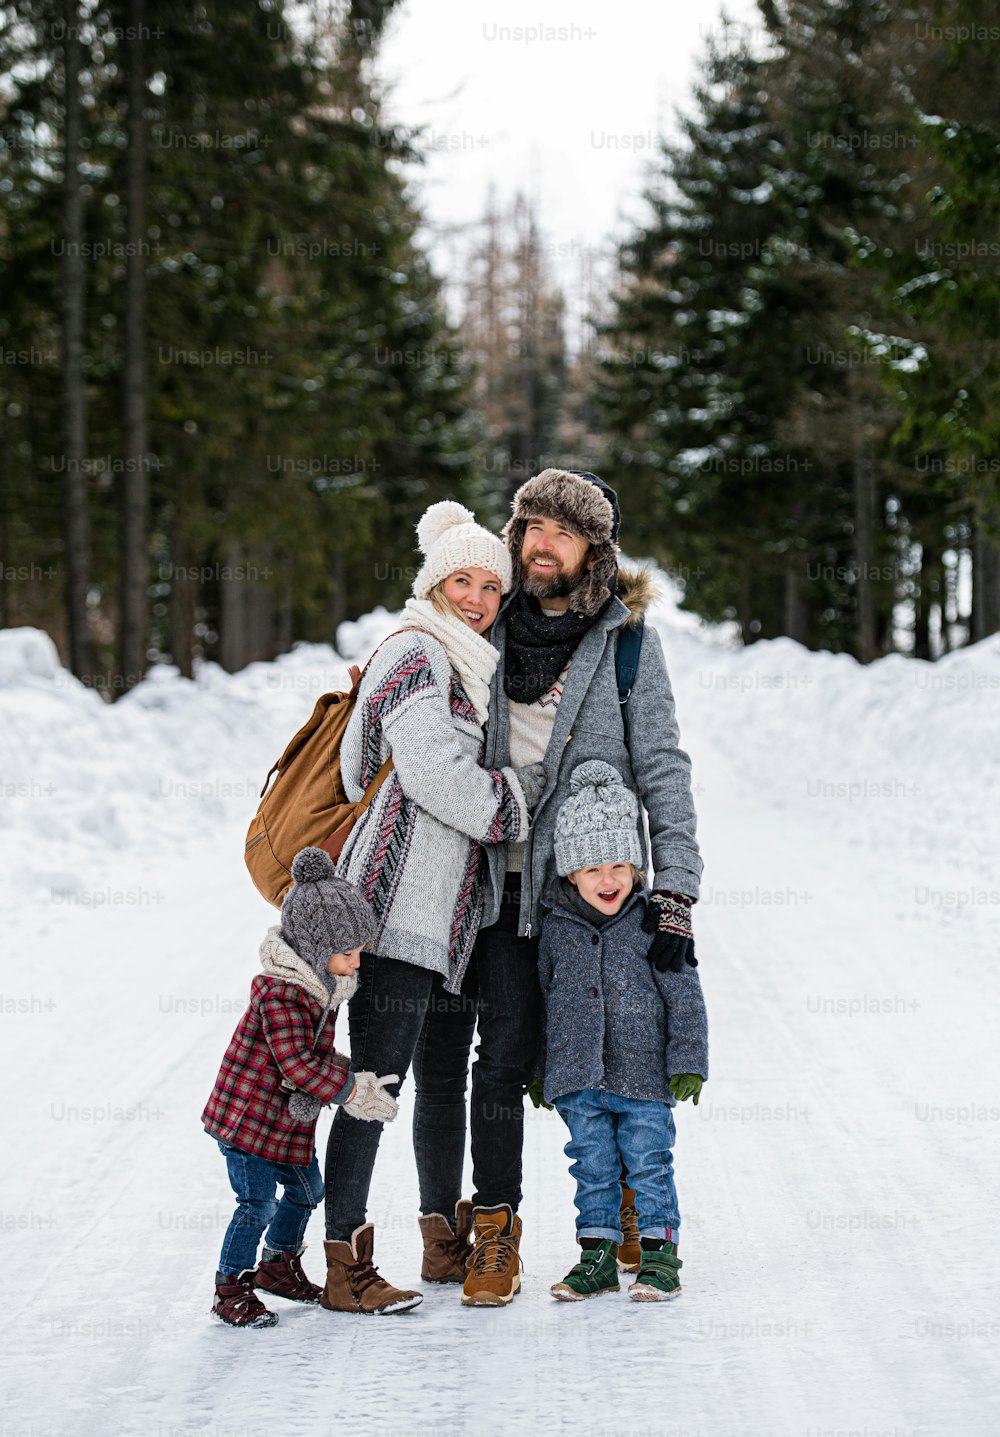 Front view portrait of father and mother with two small children in winter nature, standing in the snow.